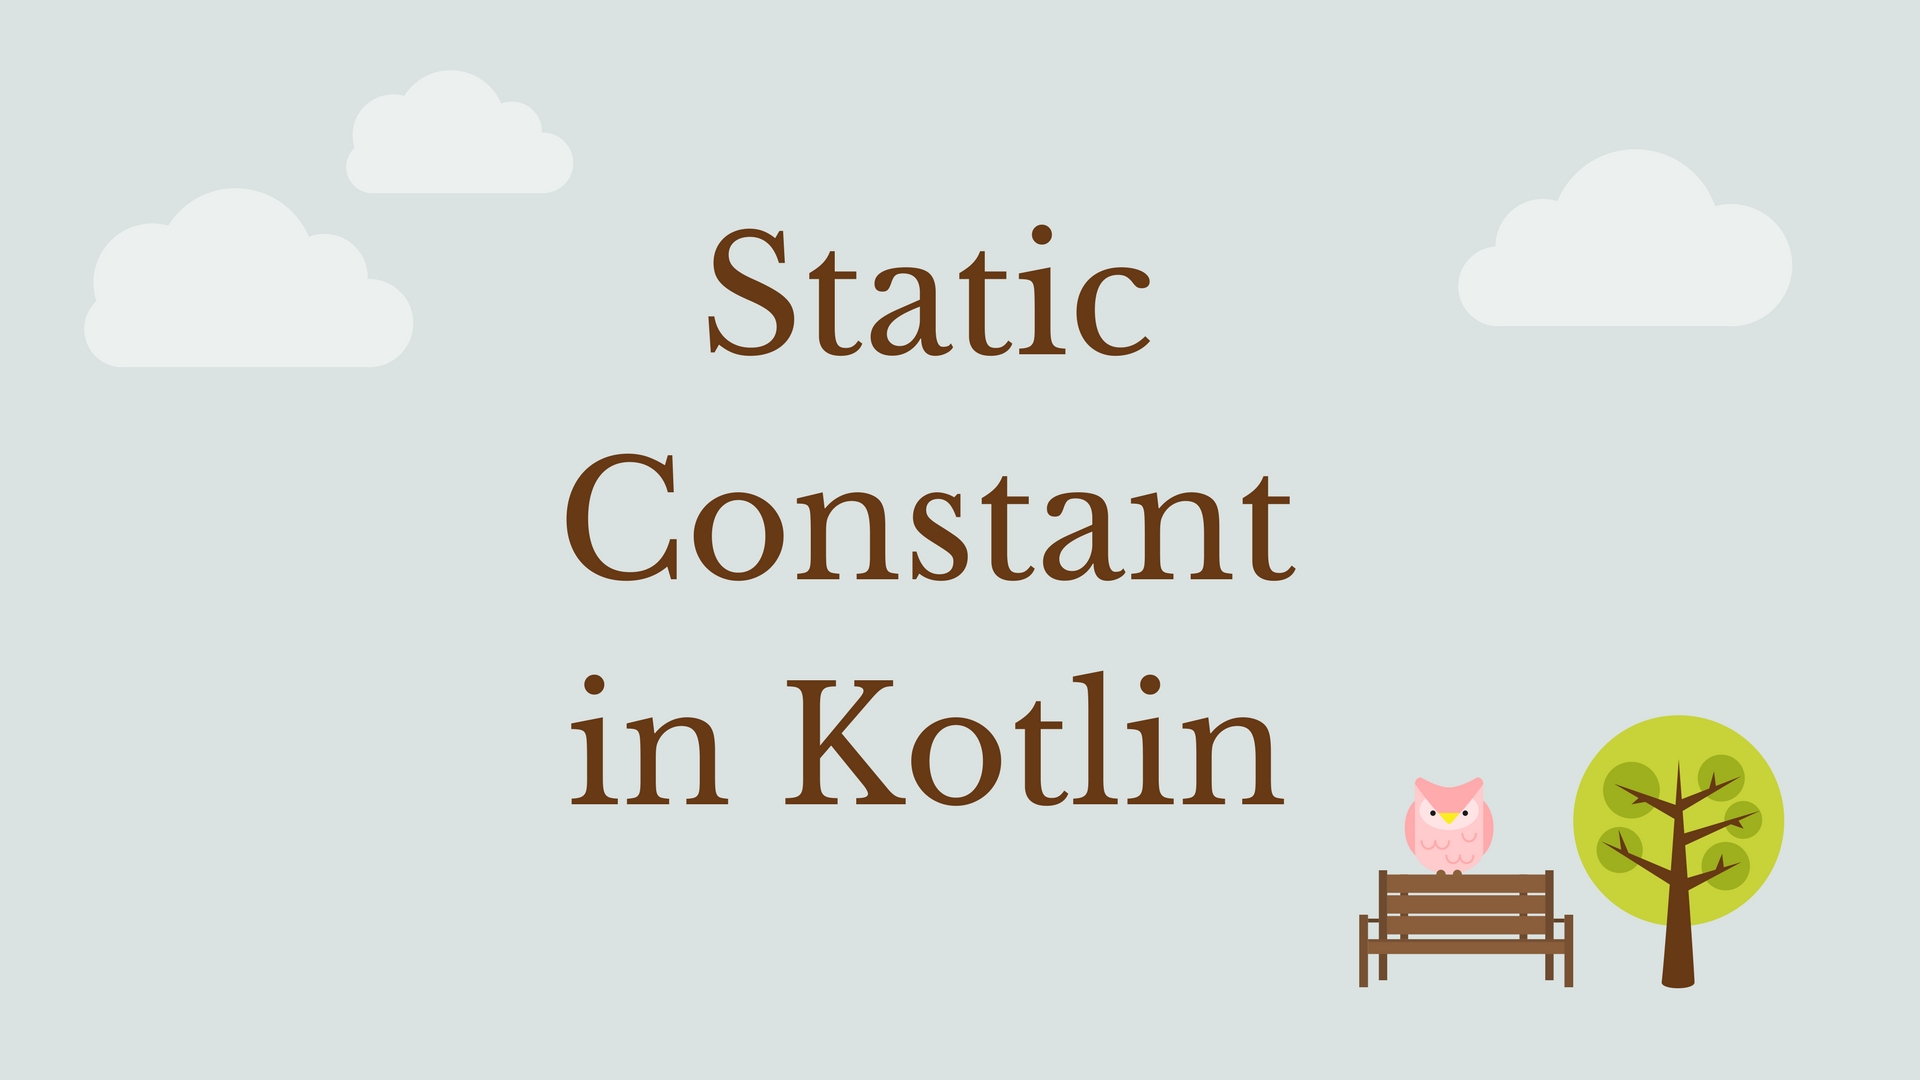 How to define static constant fields in Kotlin?